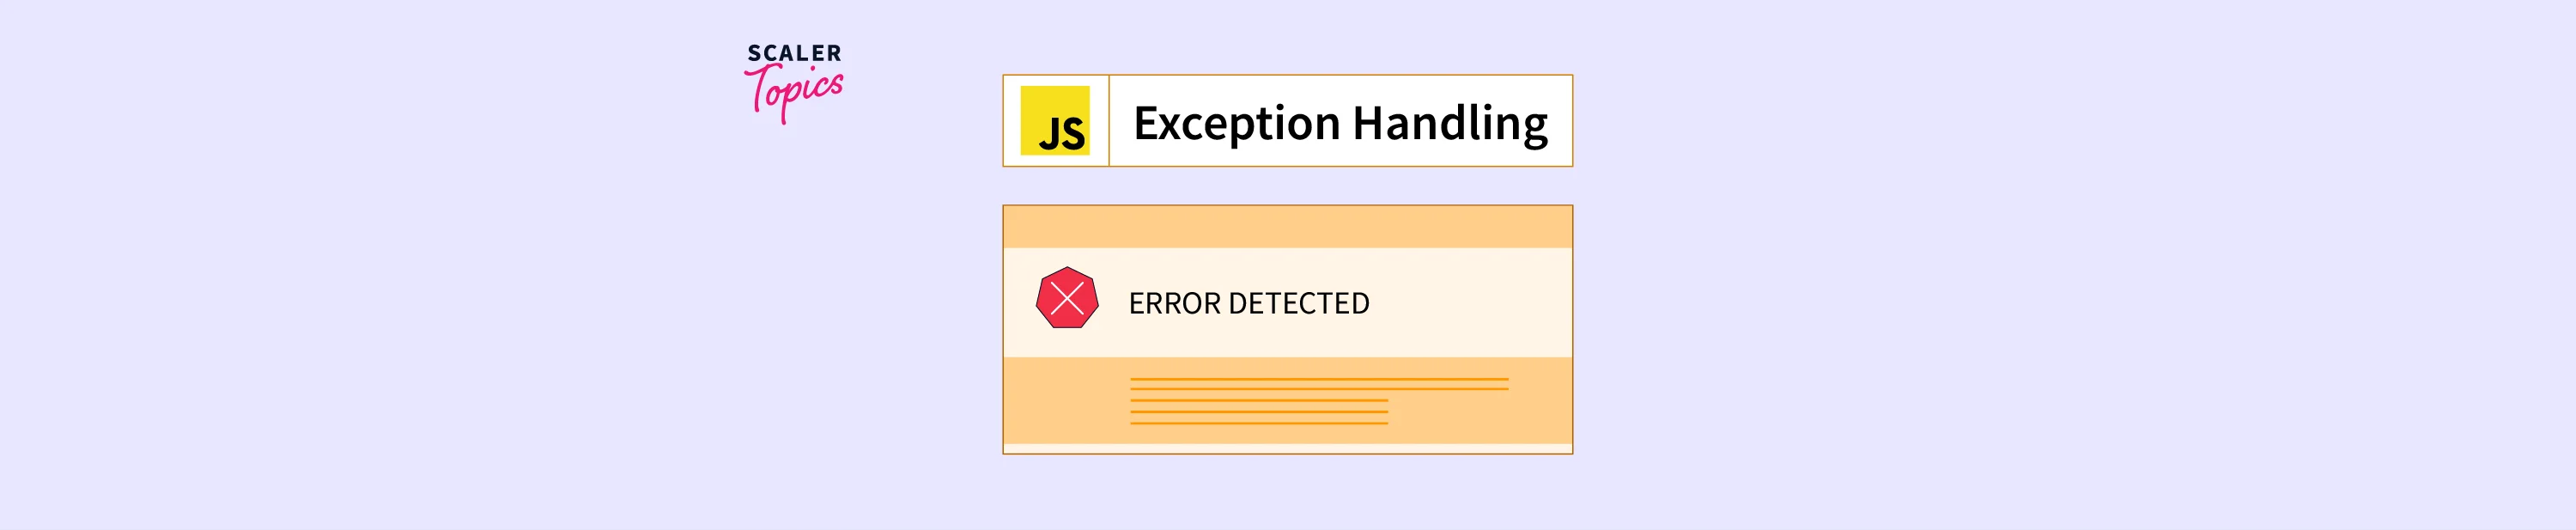 How to Handle Errors and Exceptions in JavaScript Data